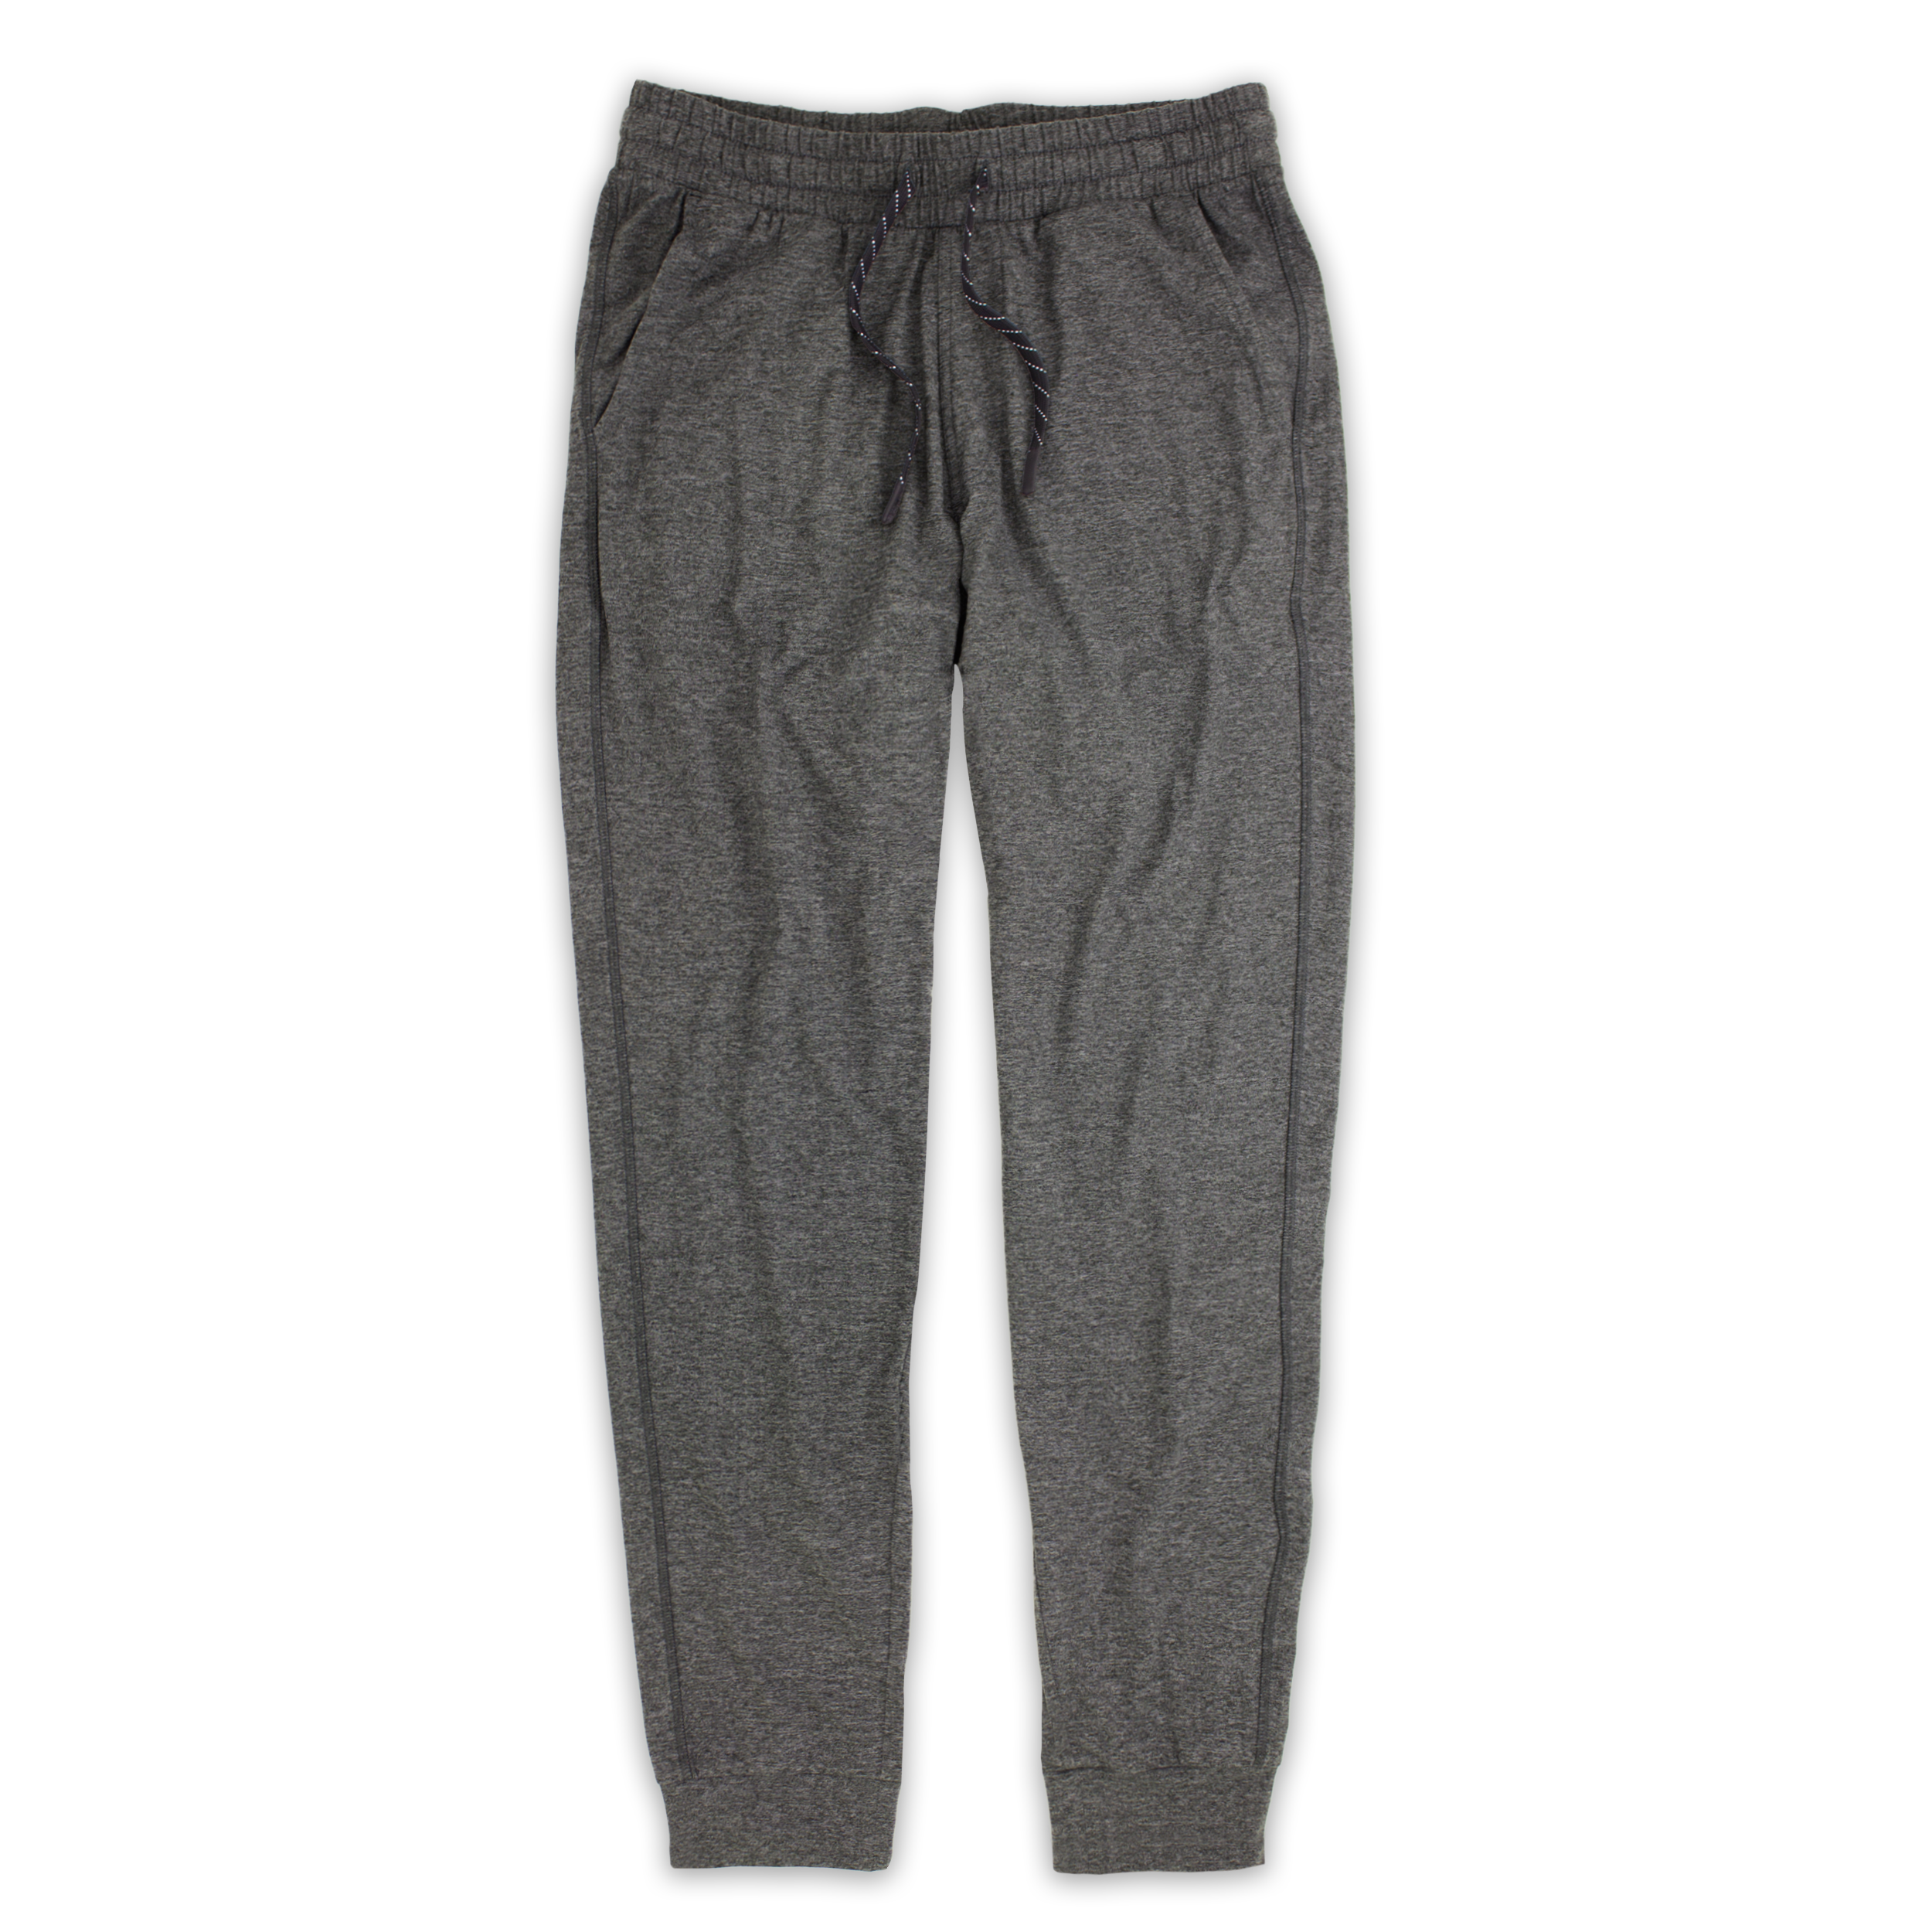 Tech Jogger Grey with elastic waistband, two front pockets, and flat black and white drawstring